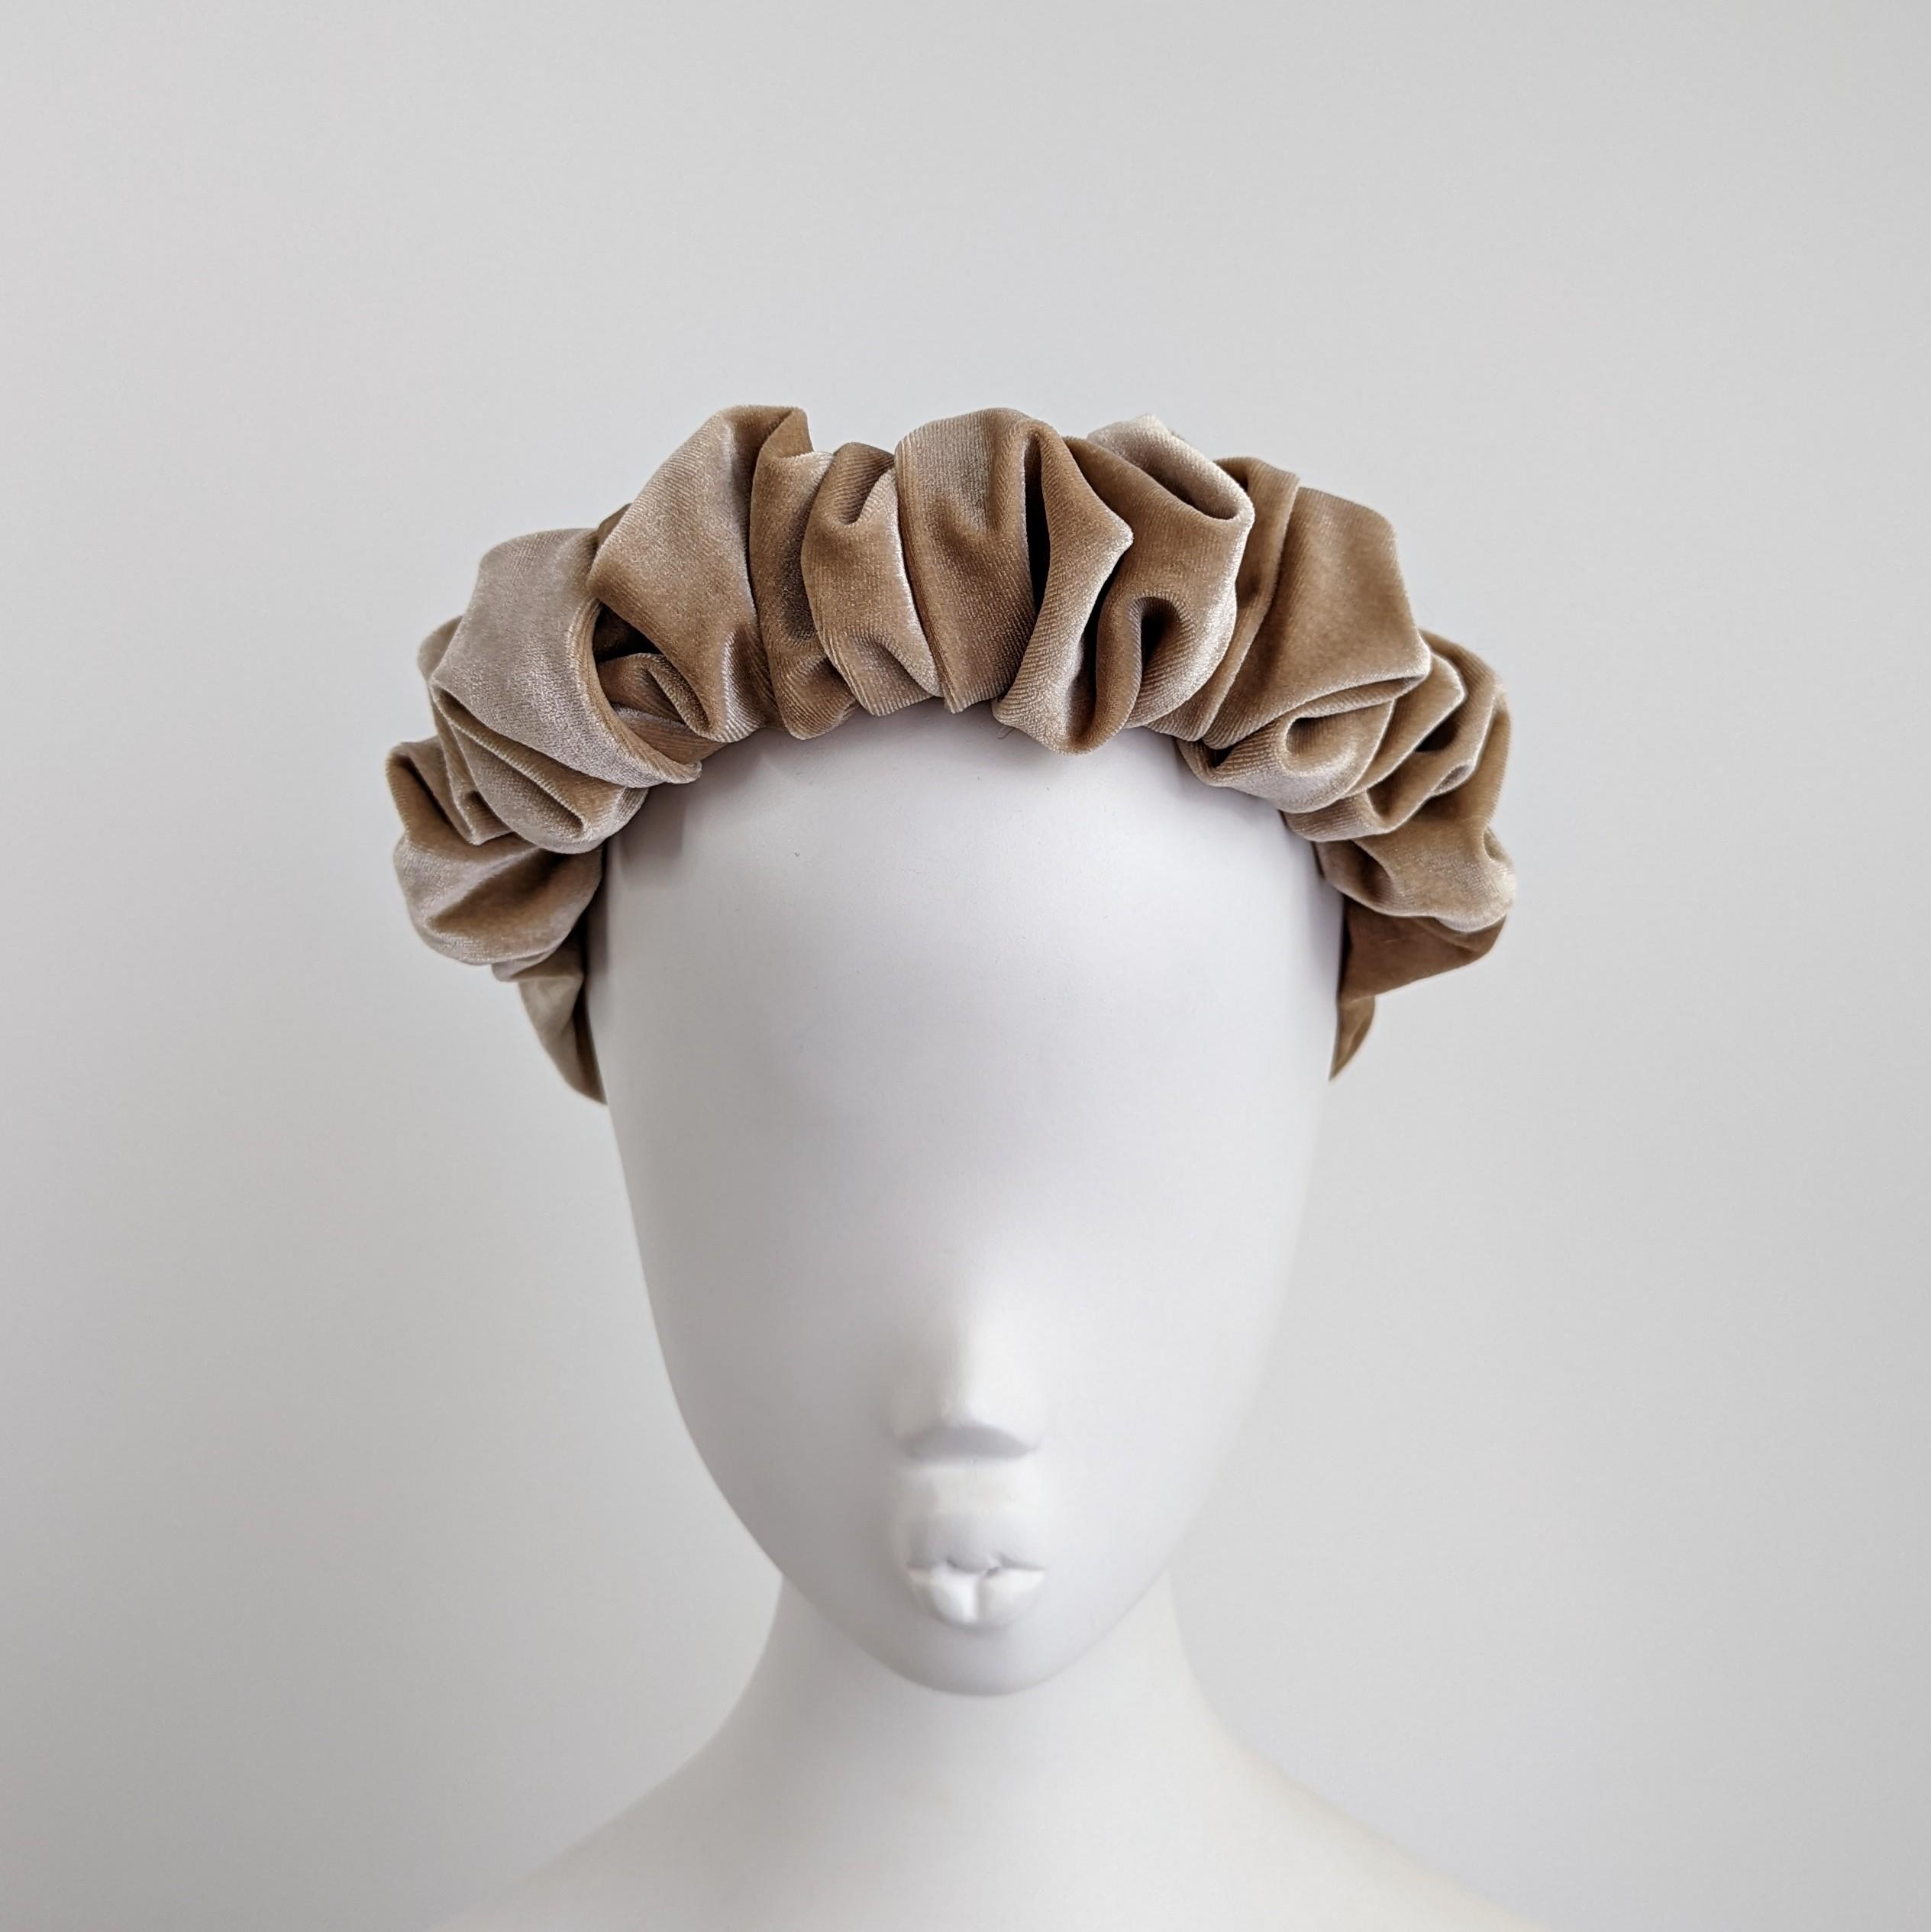 Luxury handmade headbands turbans and hair accessories from a UK designer